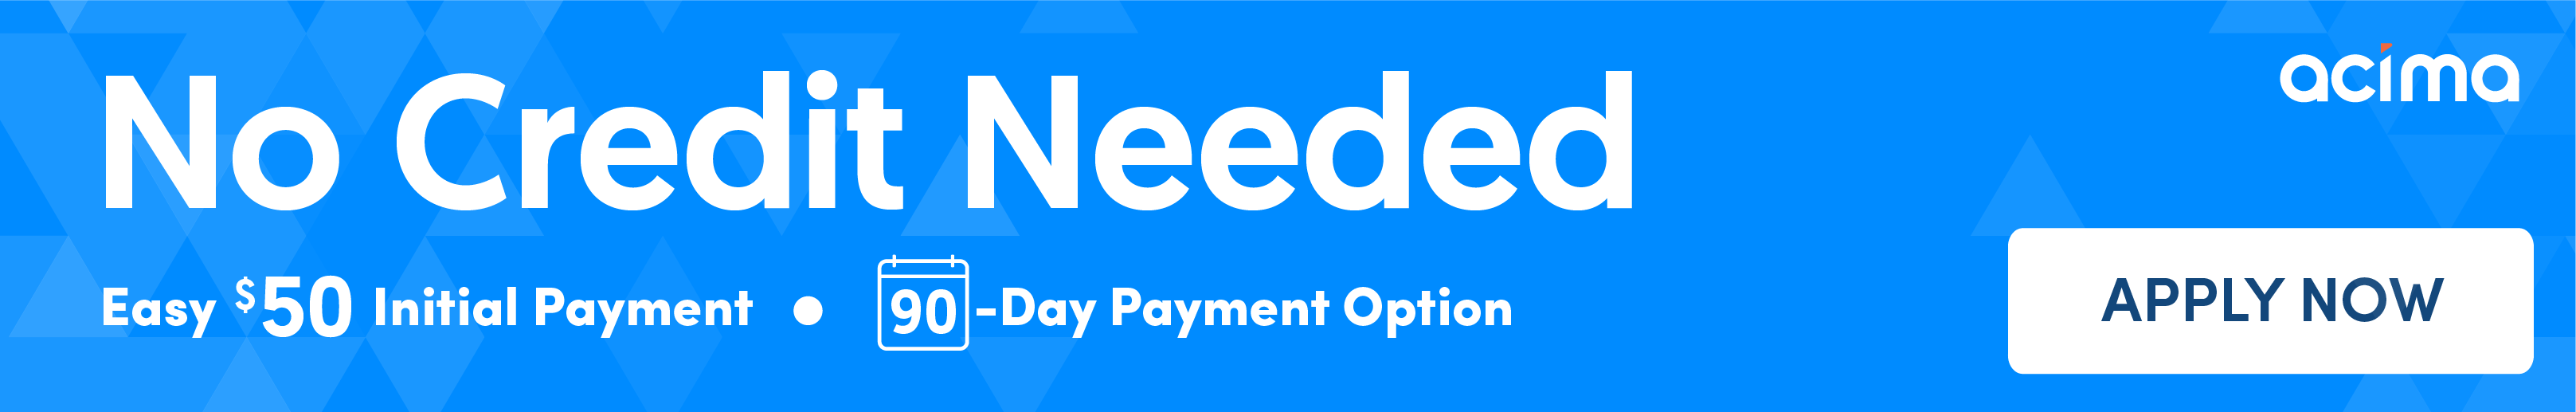 No Credit Needed. Easy $50 Initial Payment - 90 Day Payment Option. Apply Now.